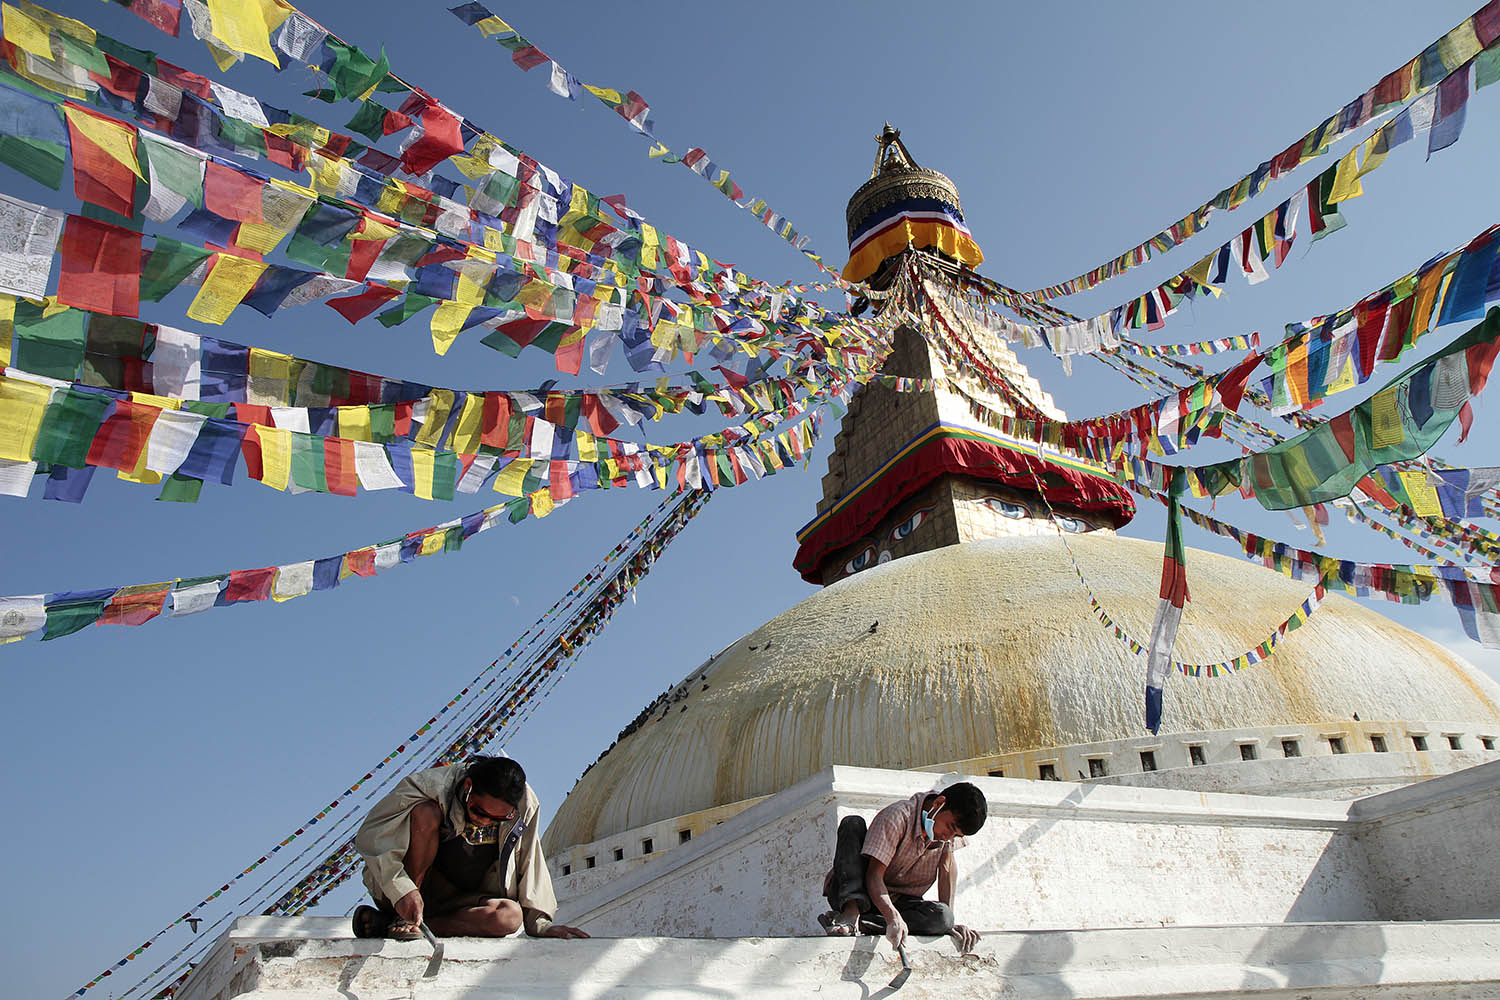  Workers at the Boudhanath in Kathmandu chip paint from the aging facade of the holy Buddhist site. The stupa, one of the largest in the world, had accumulated many layers of paint over its existence. 